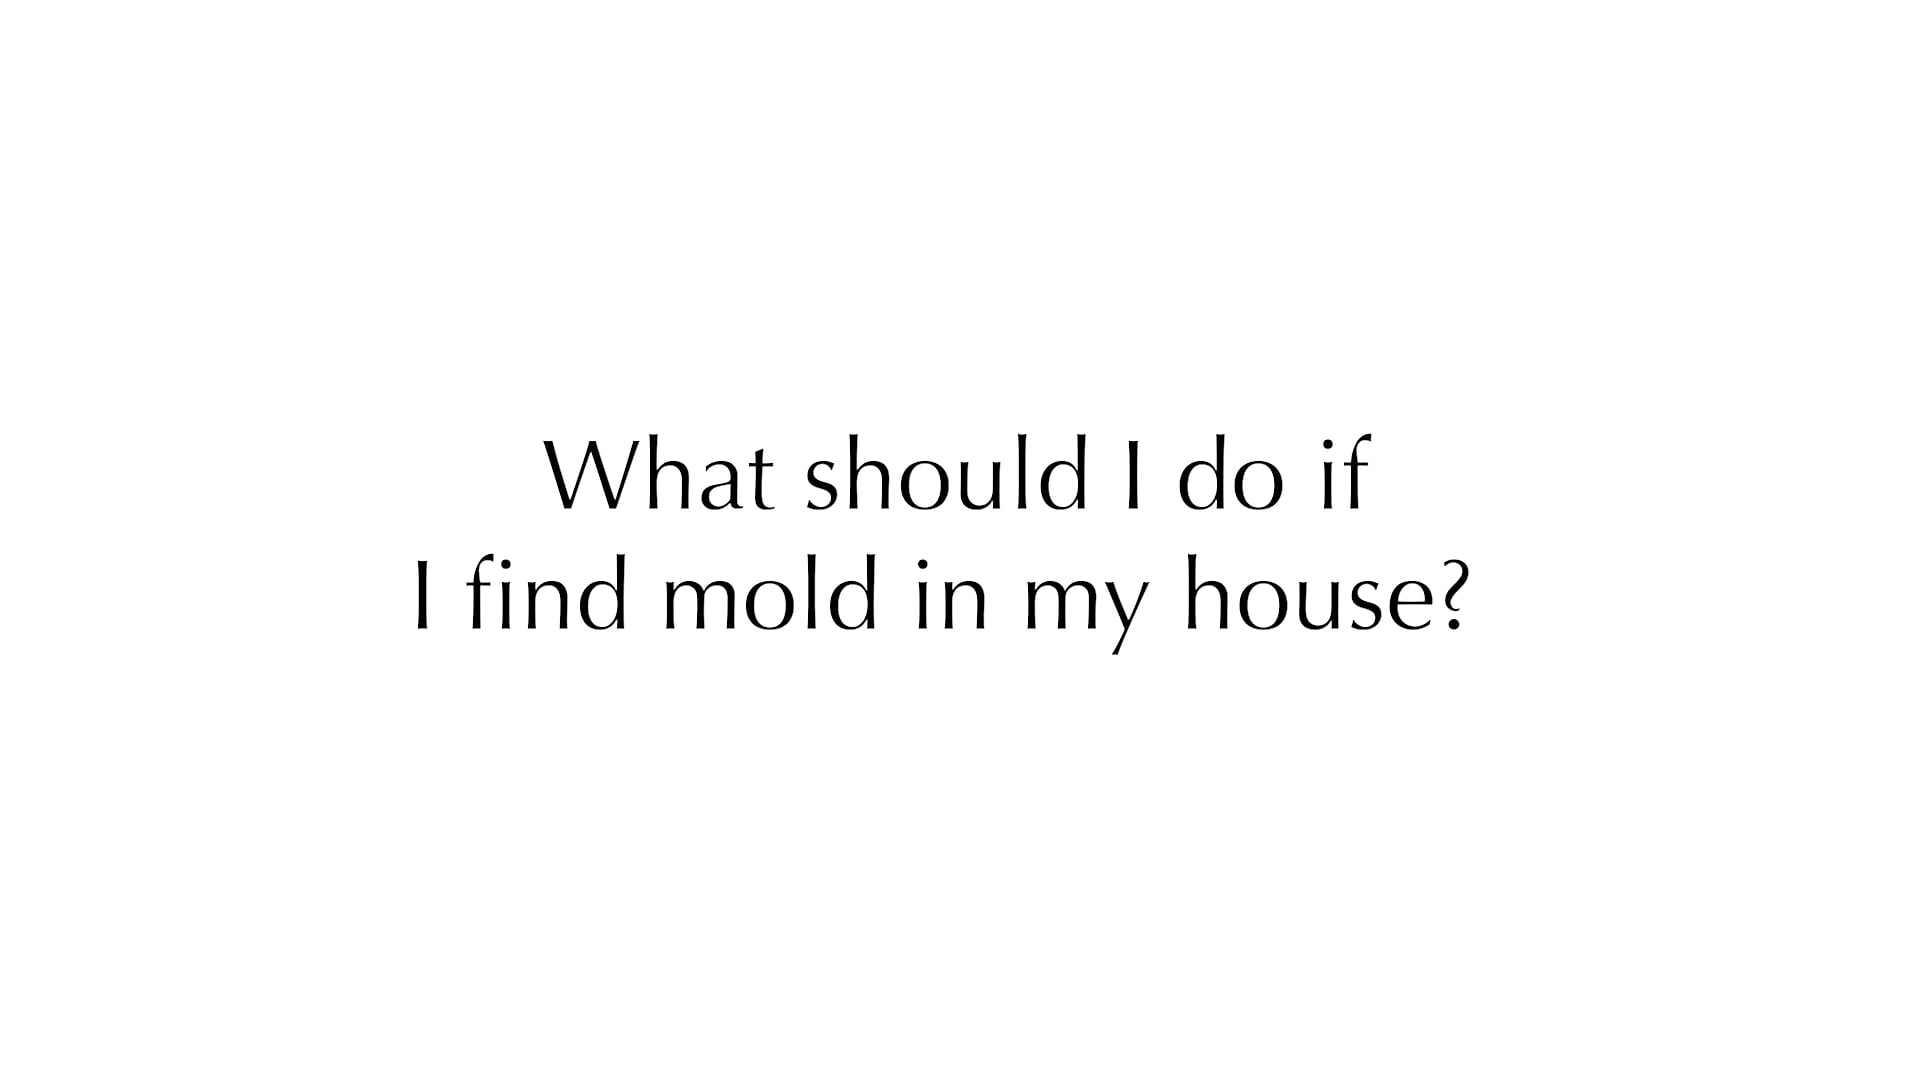 What should I do if I find mold in my house